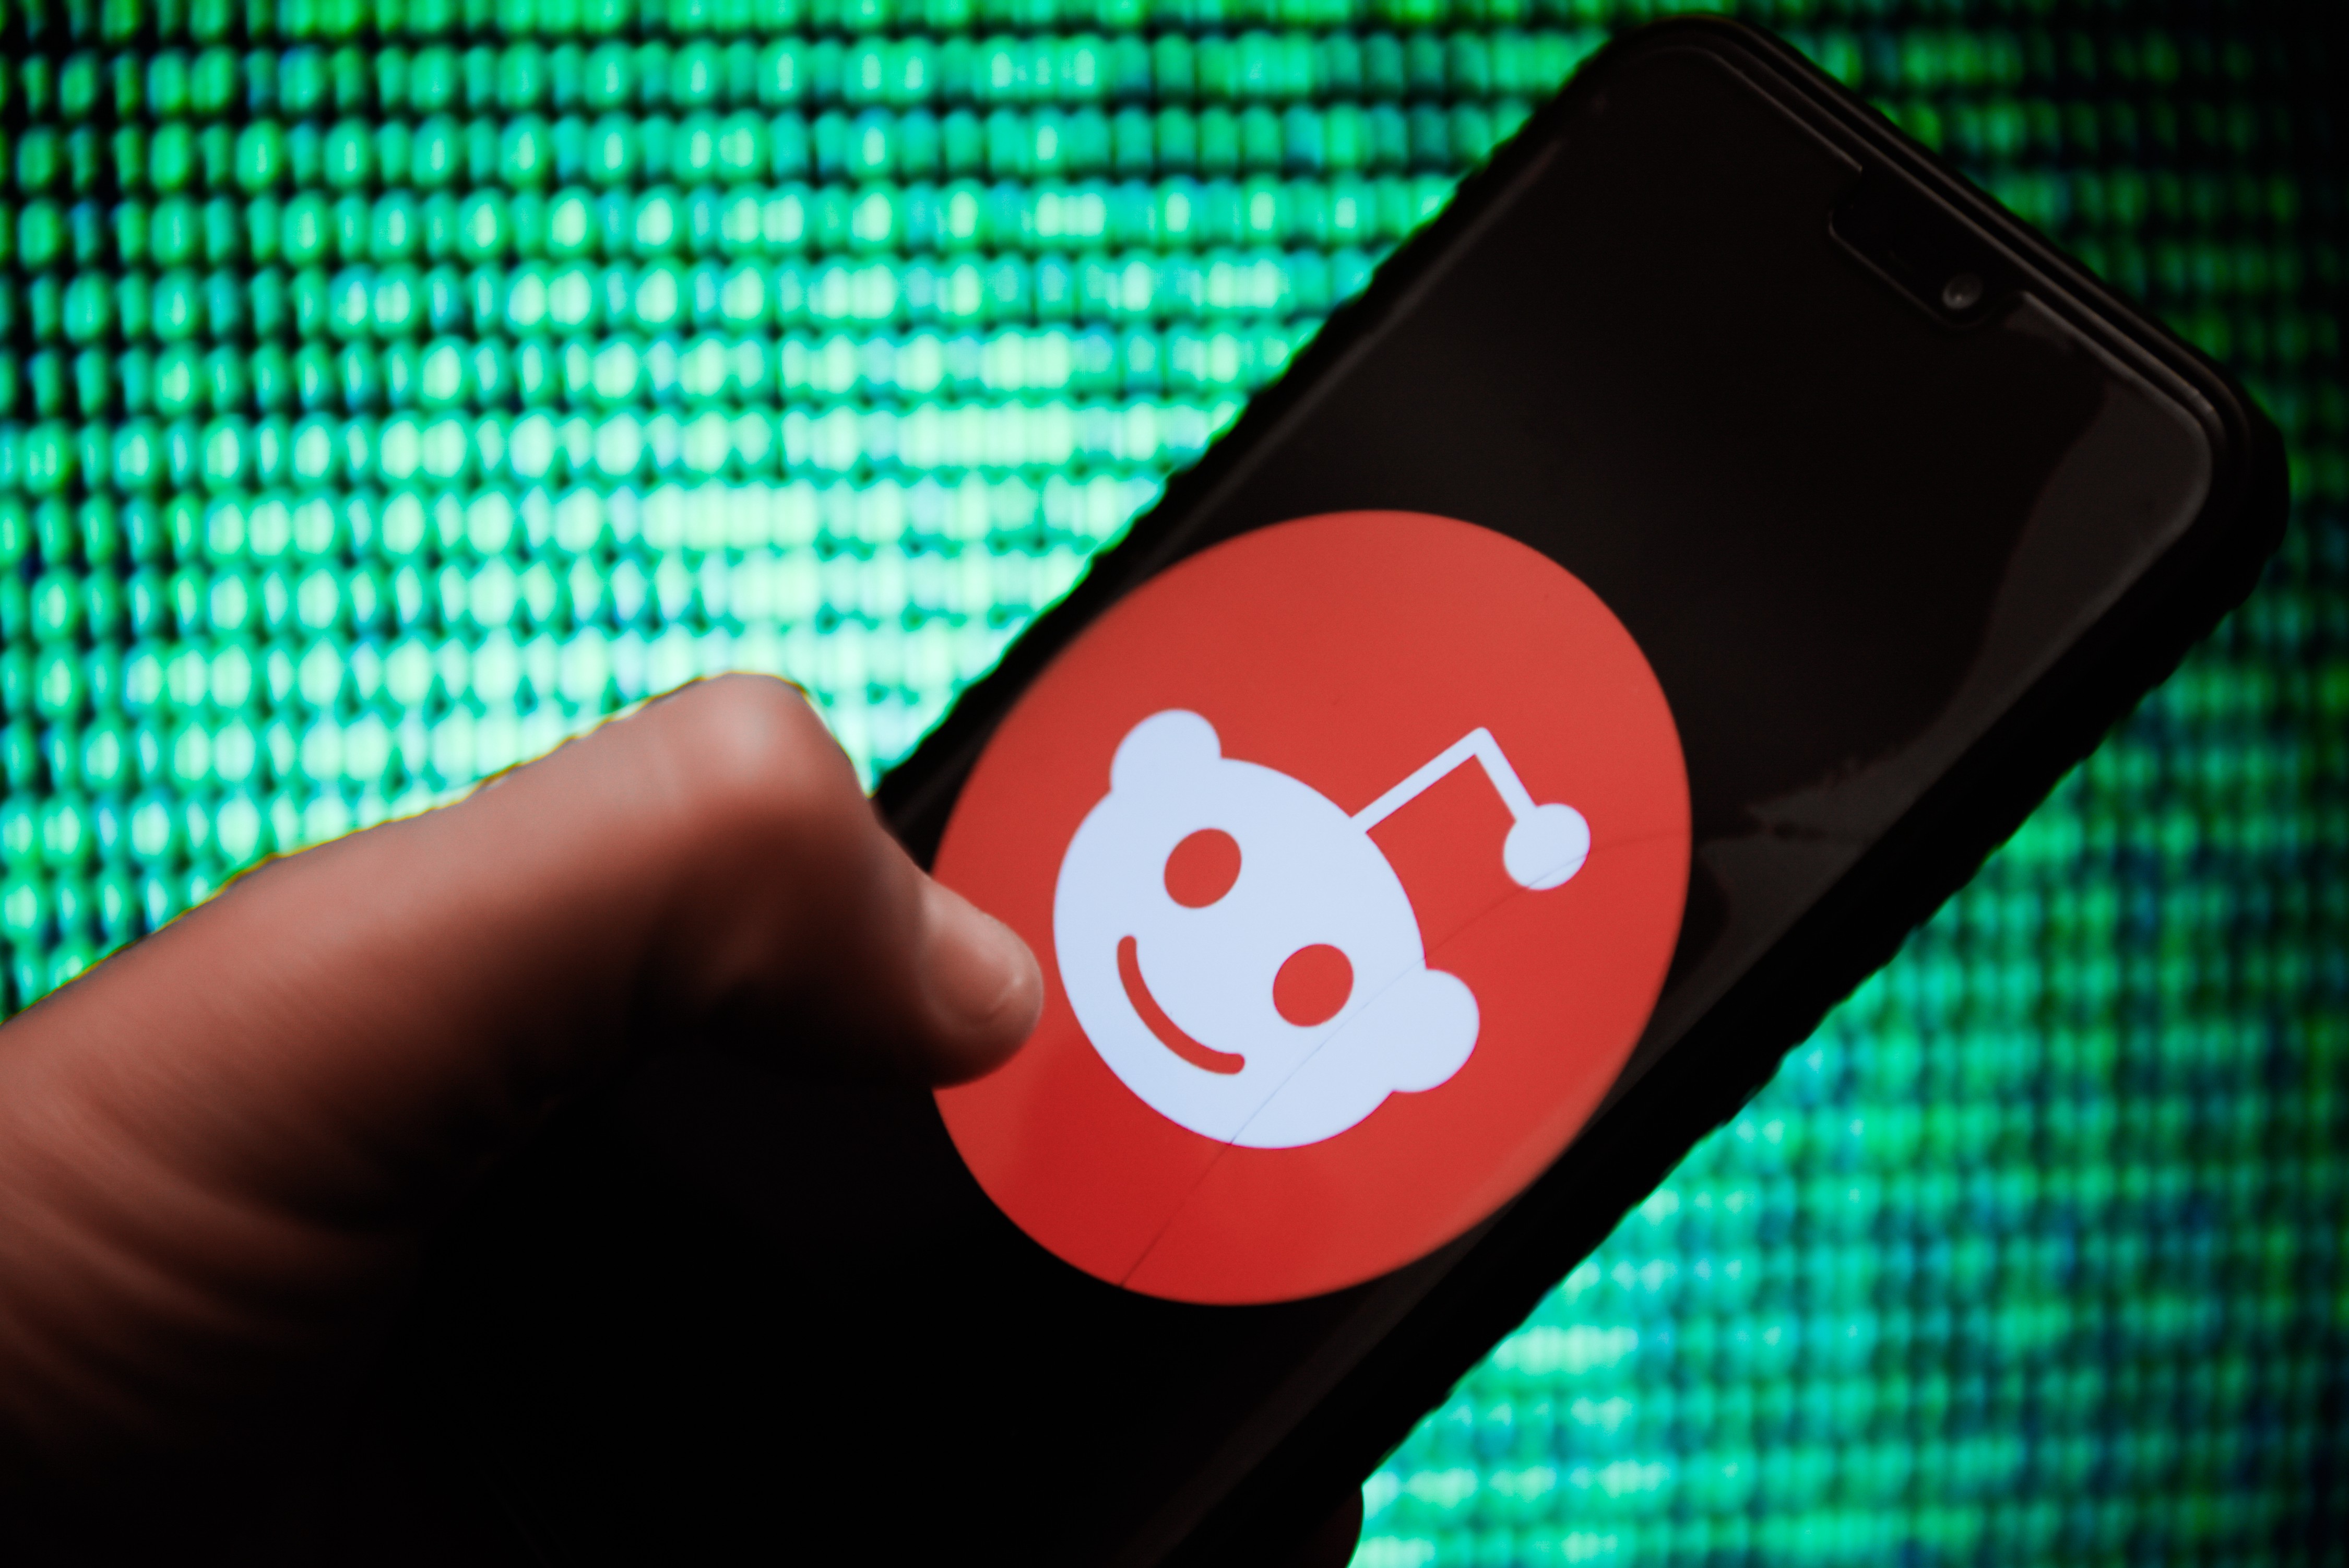 In this photo illustration, a hand holds up an Android mobile phone displaying the Reddit logo.